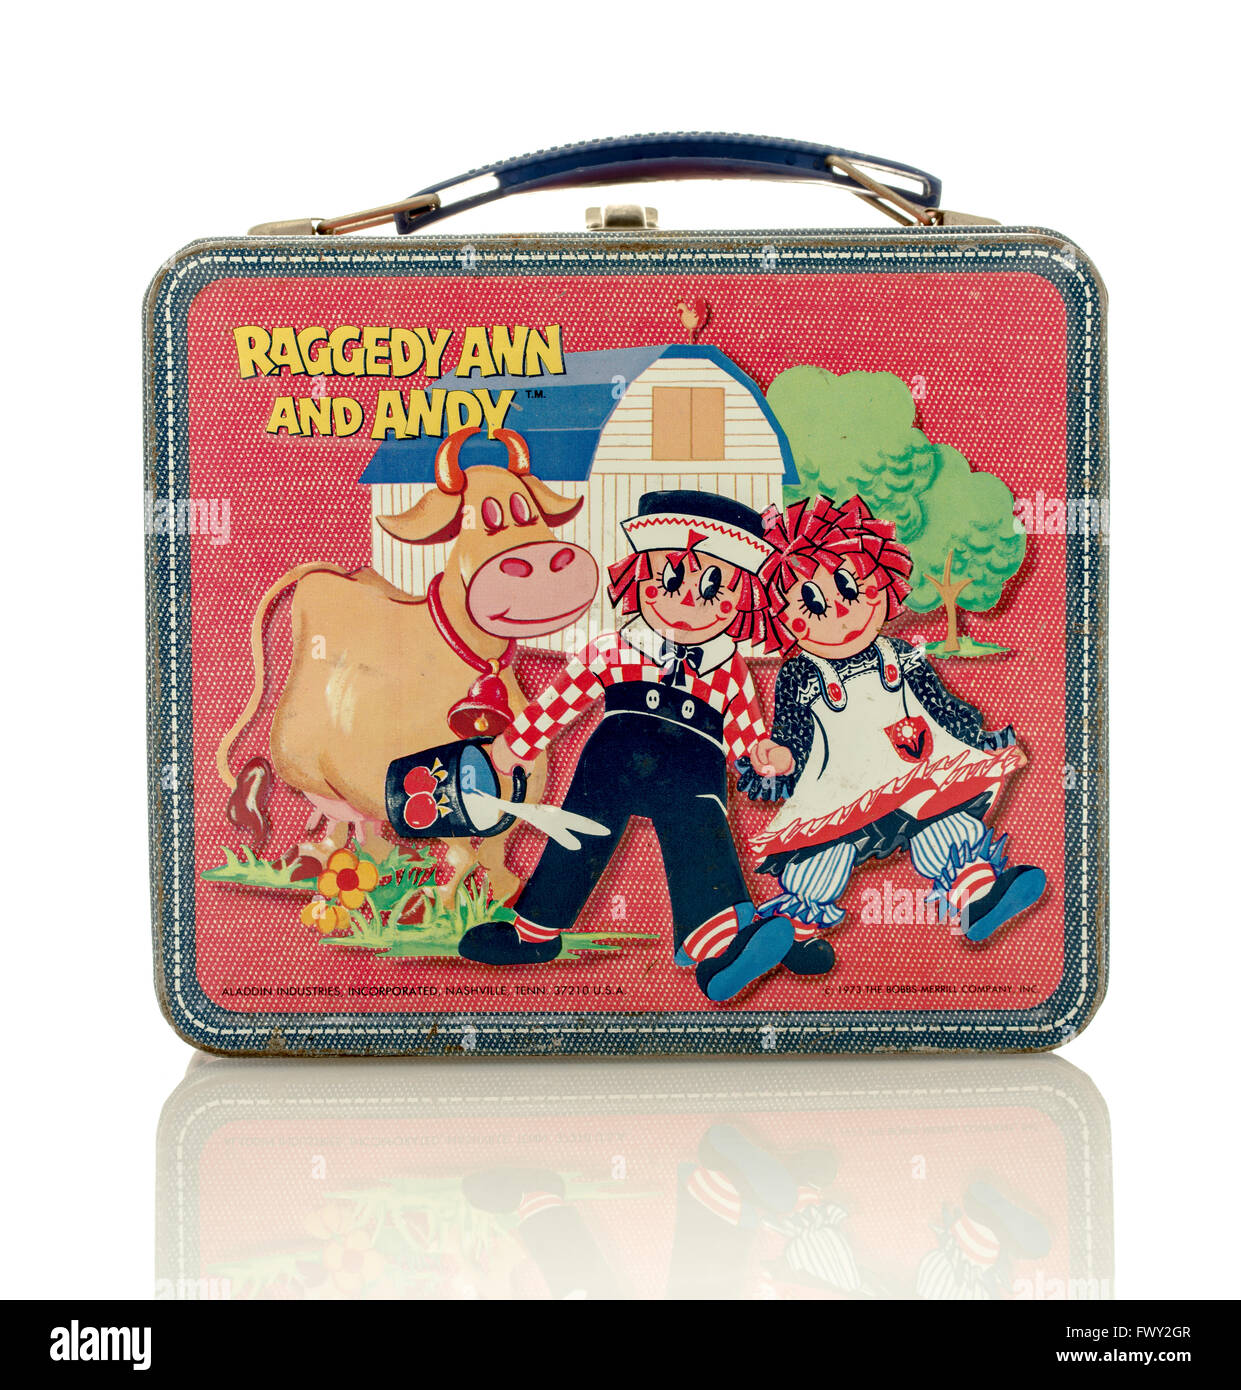 Winneconne, WI - 8 April 2016:  Lunch box featuring Raggedy Ann and Andy on an isolated background. Stock Photo